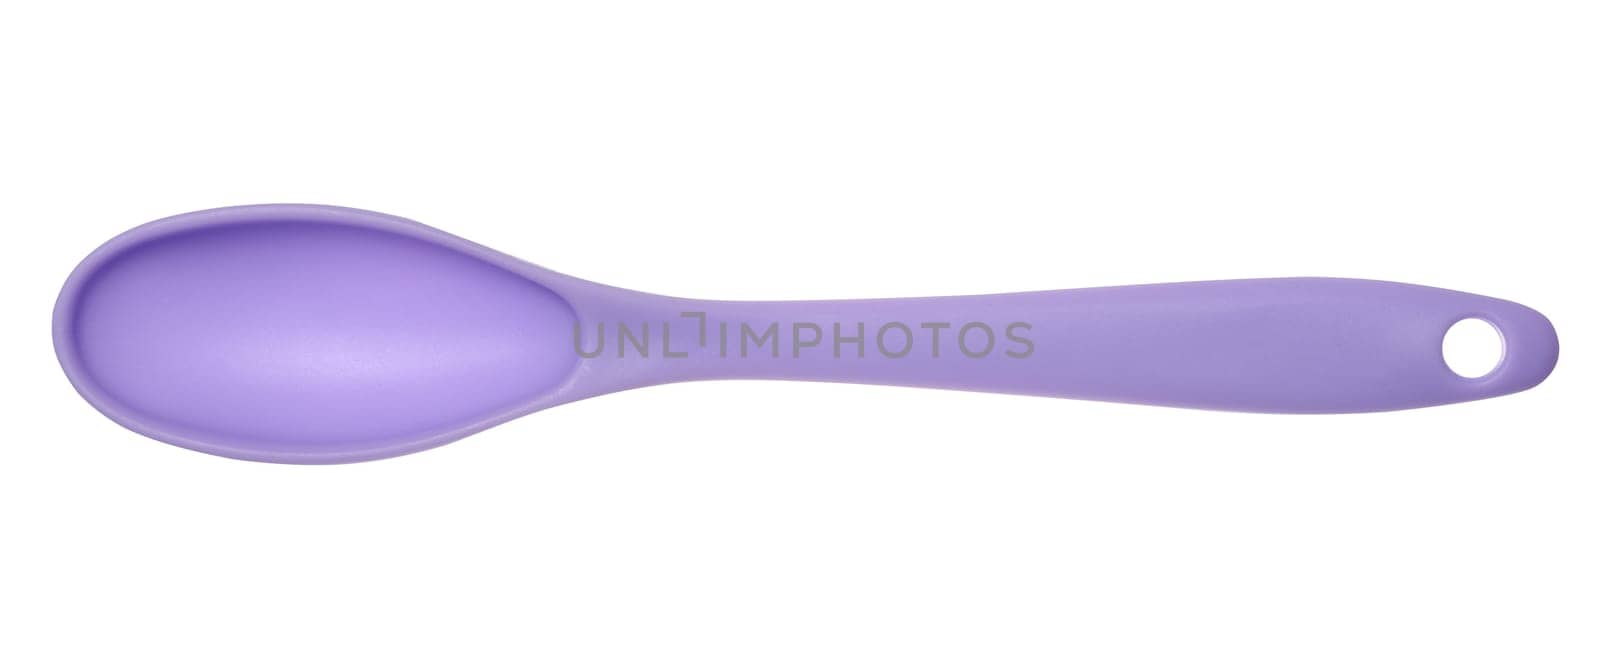 Silicone spoon for stirring food on isolated background by ndanko